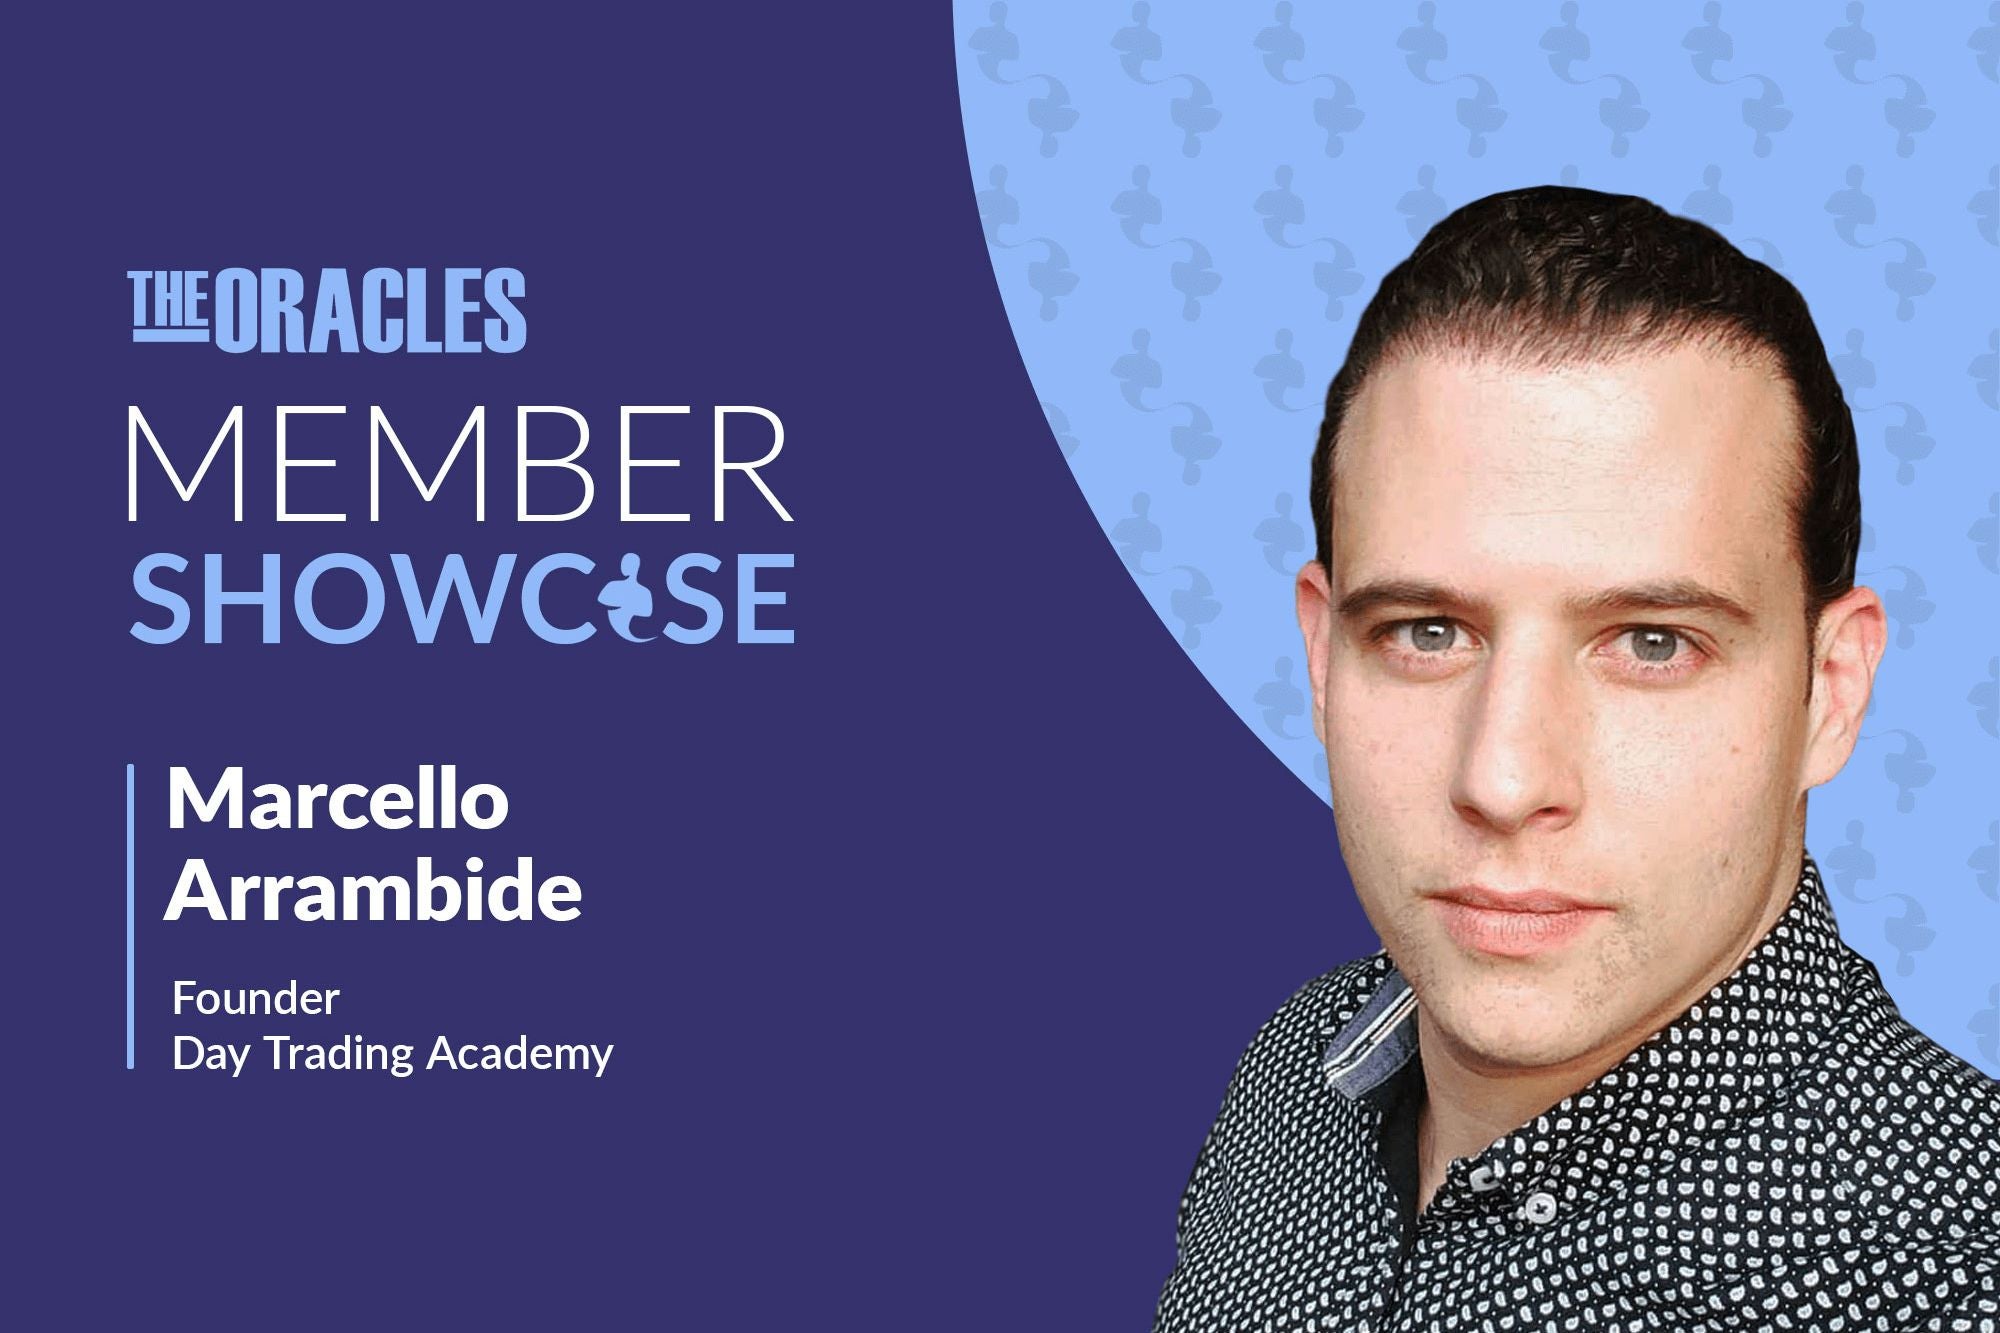 Is the Day Trading Academy a Scam? Should You Trust Marcello Arrambide?